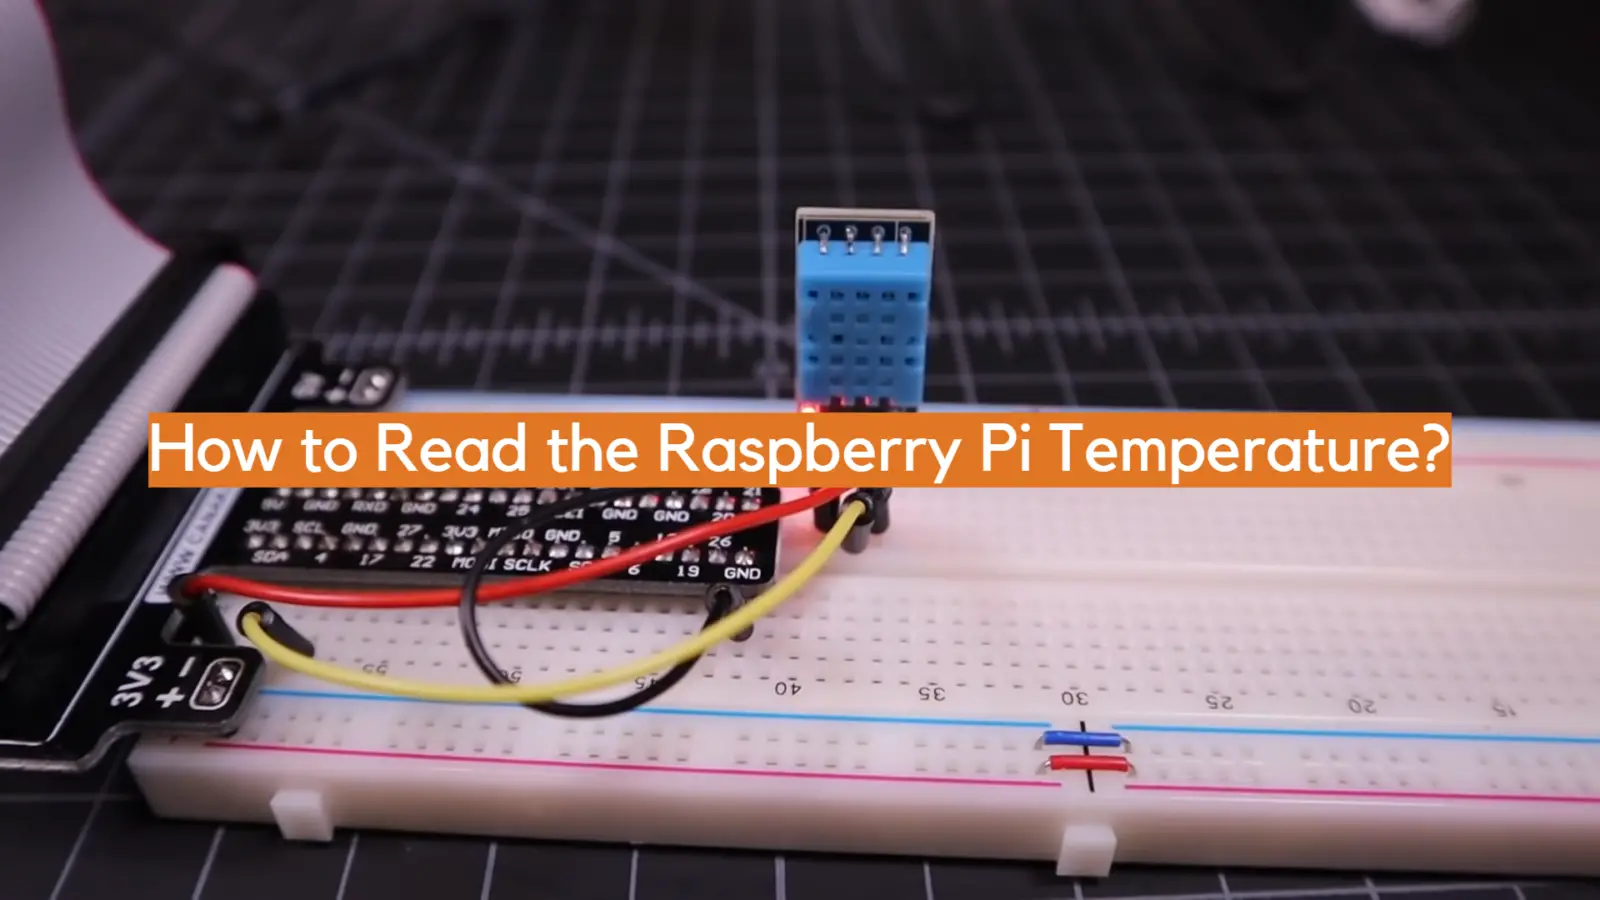 How to Read the Raspberry Pi Temperature?